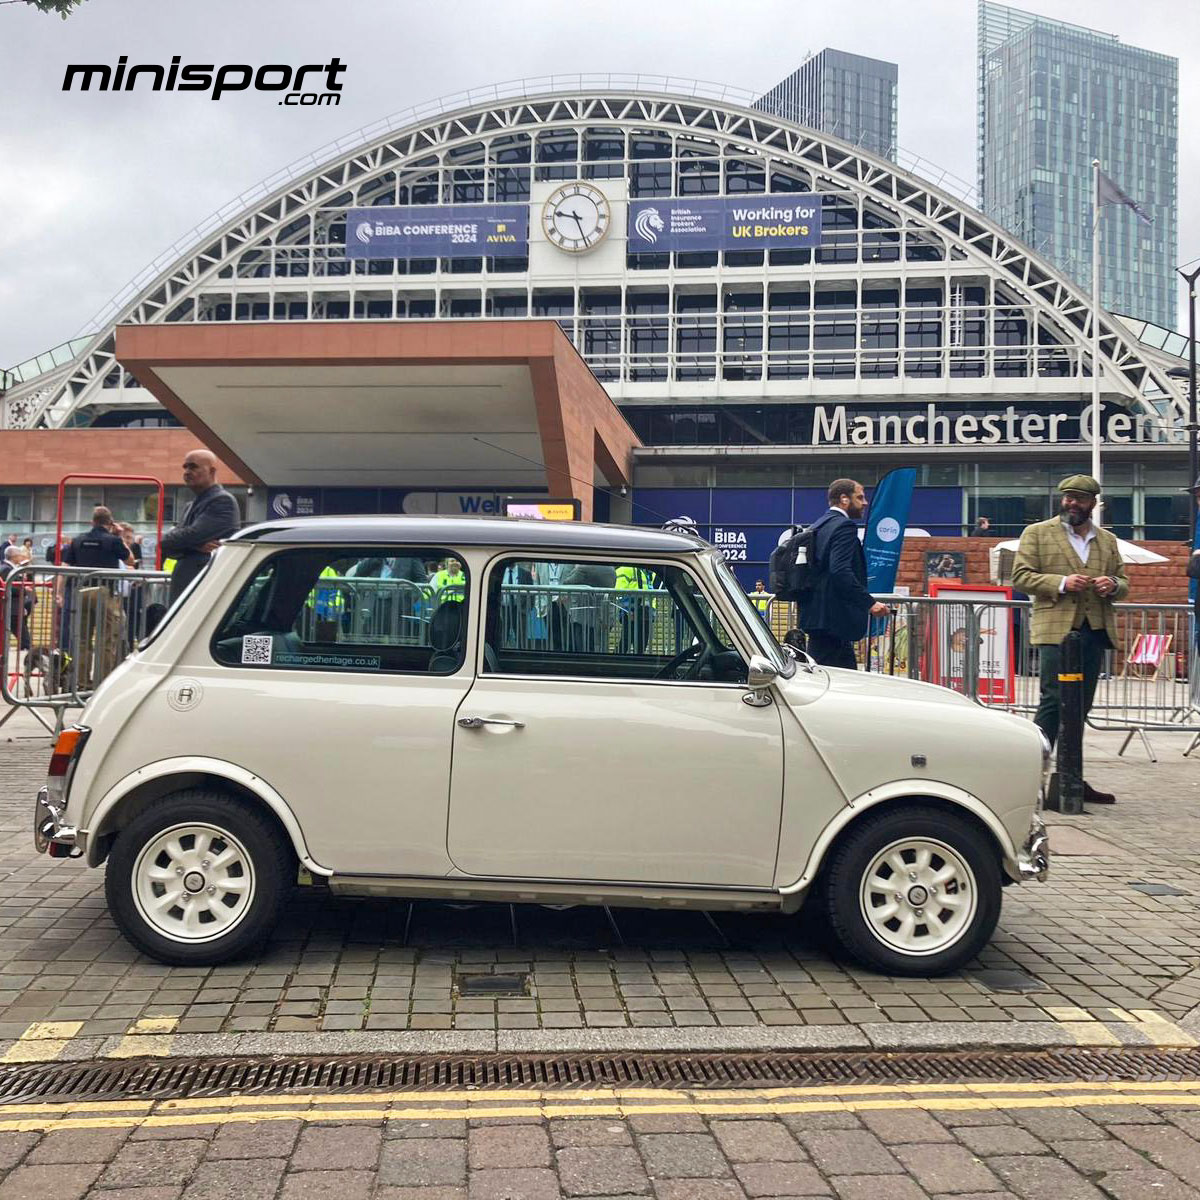 'Merlin' is in Manchester today at the BIBA Conference! Keep your eyes peeled because our classic Mini EV, will be cruising through the City Centre, turning heads wherever it goes! Don't miss out on the chance to spot this iconic ride in action! #BIBAConference #minisportltd